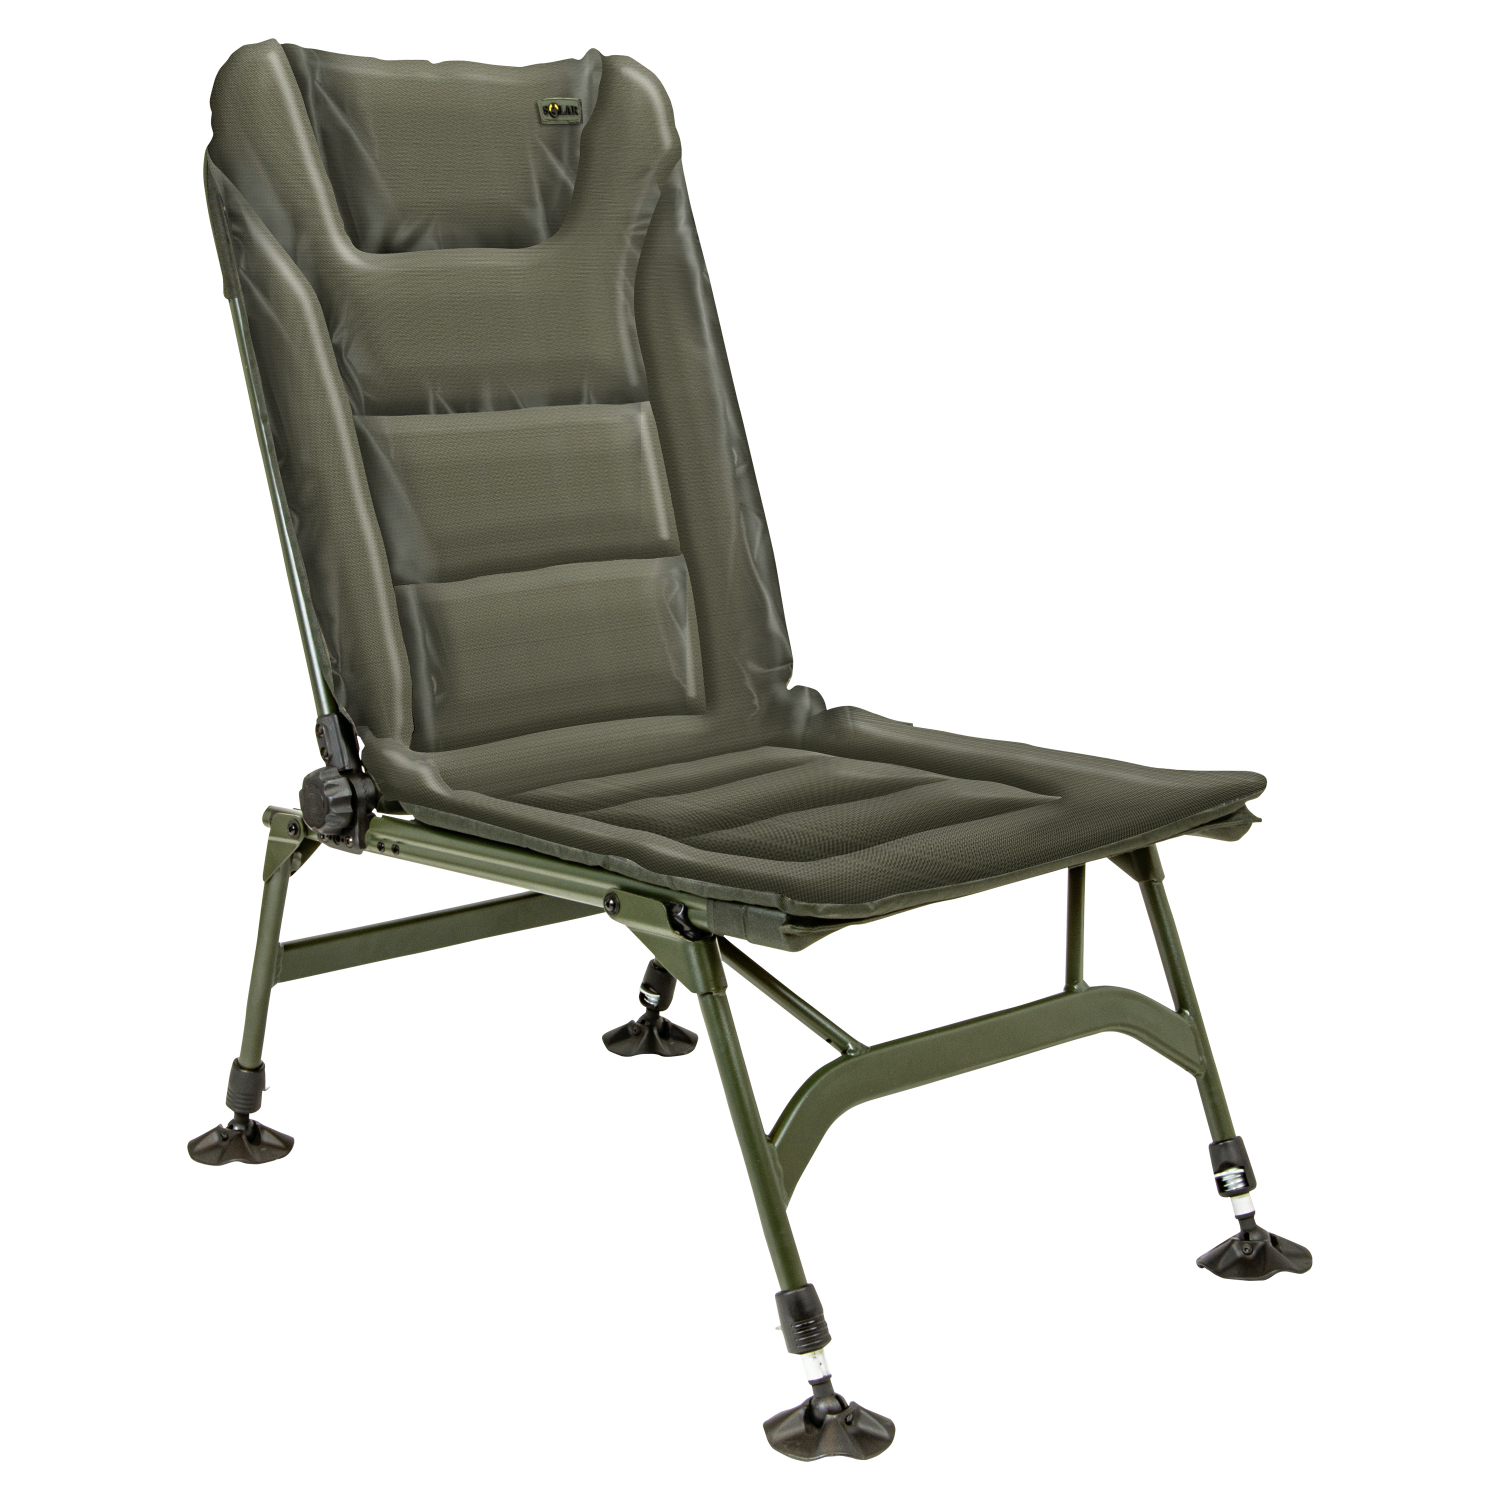 Solar Tackle Carp chair UnderCover Session Chair (green) at low prices